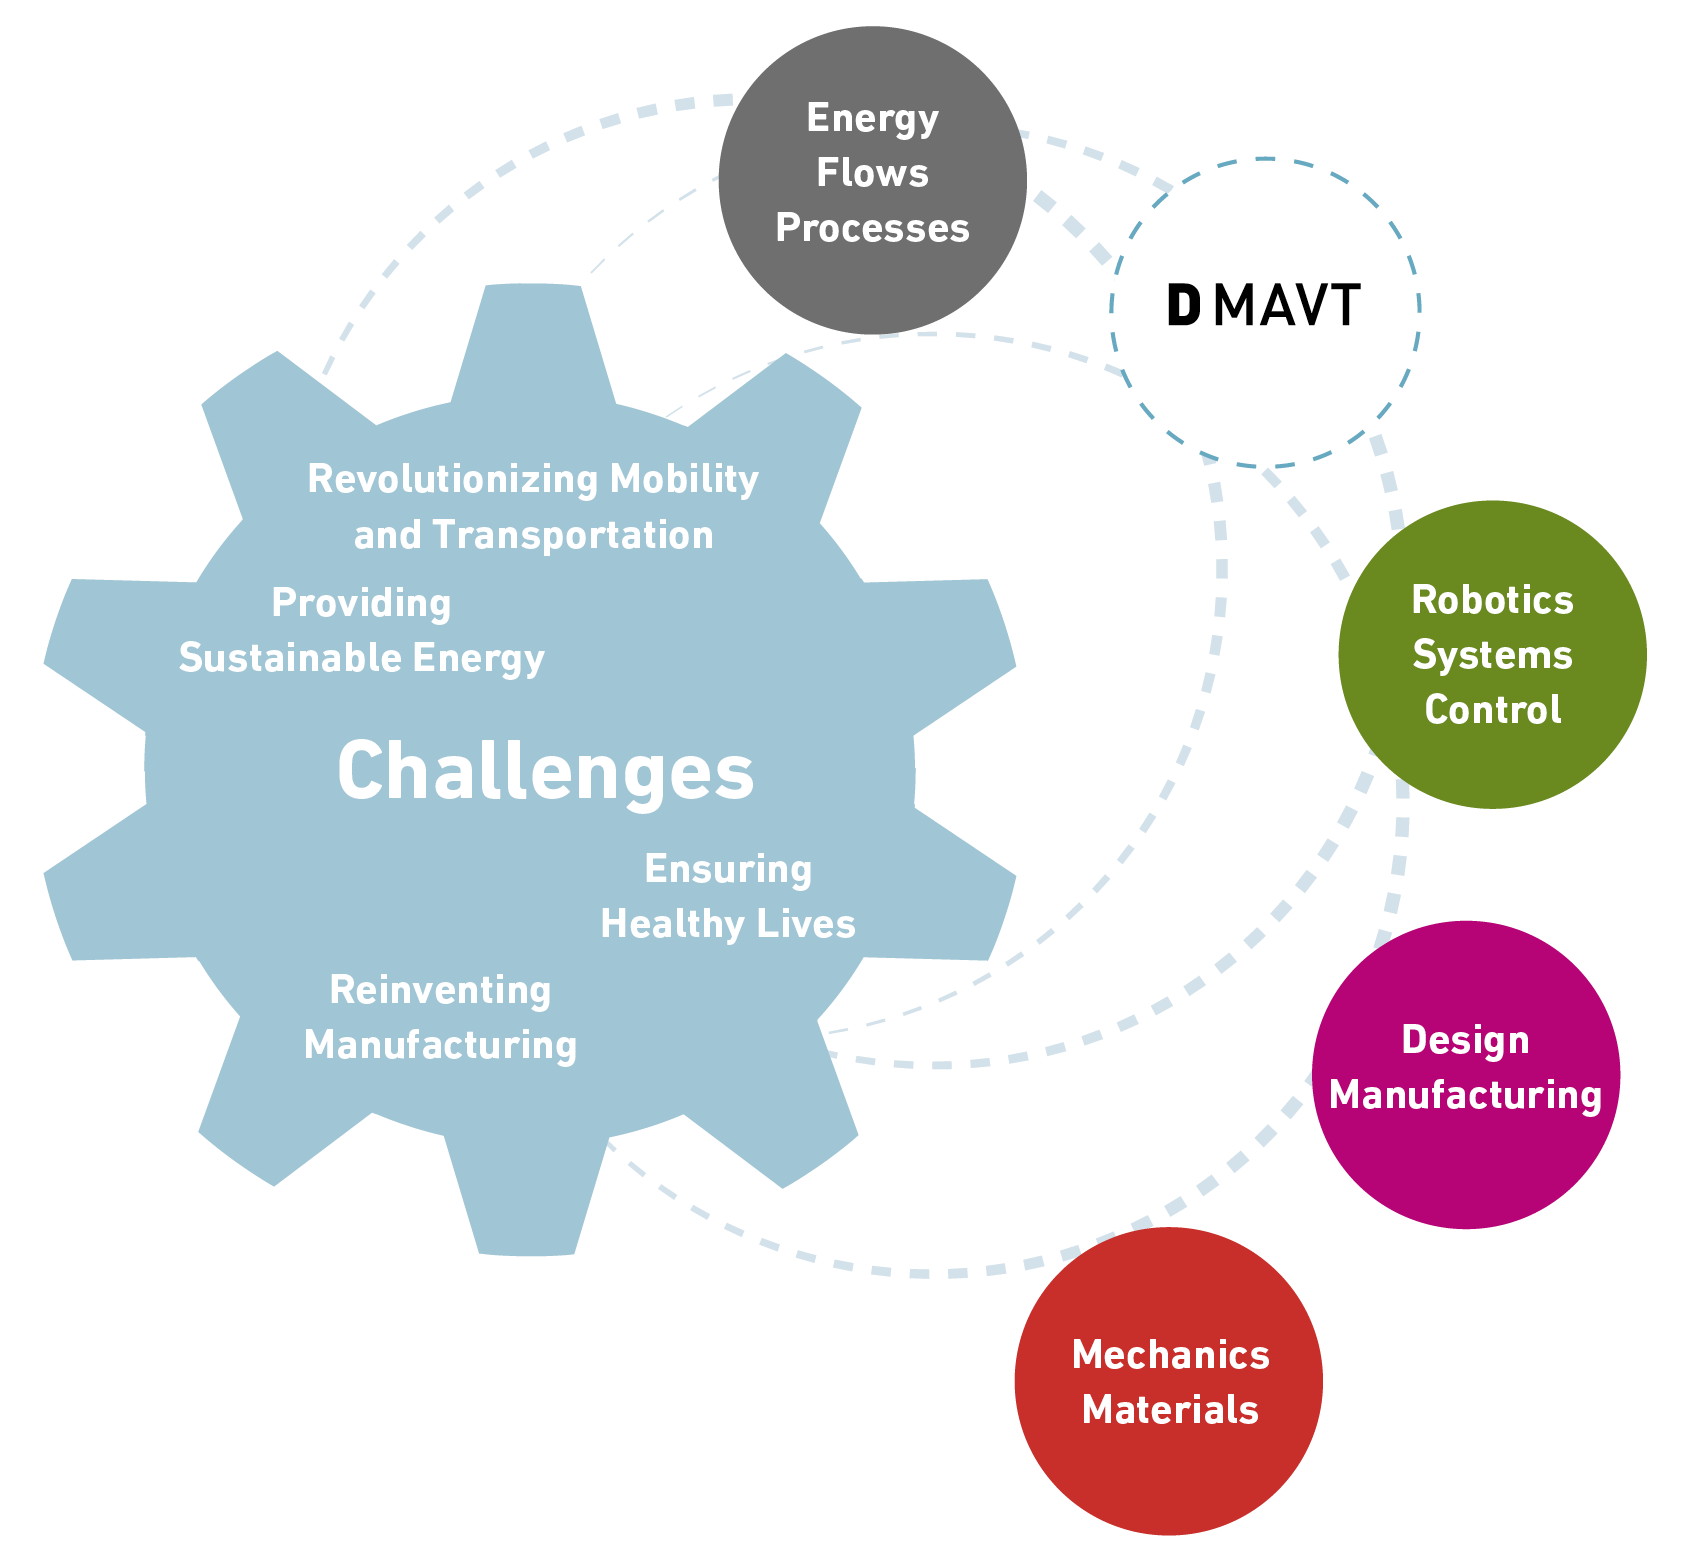 Key challenges: Revolutionizing Mobility; Providing Sustainable Energy; Ensuring Healthy Lives; Reinventing Manufacturing. Key disciplines: Energy, Flows, Processes; Robotics, Systems, Control; Design, Manufacturing; Mechanics, Materials